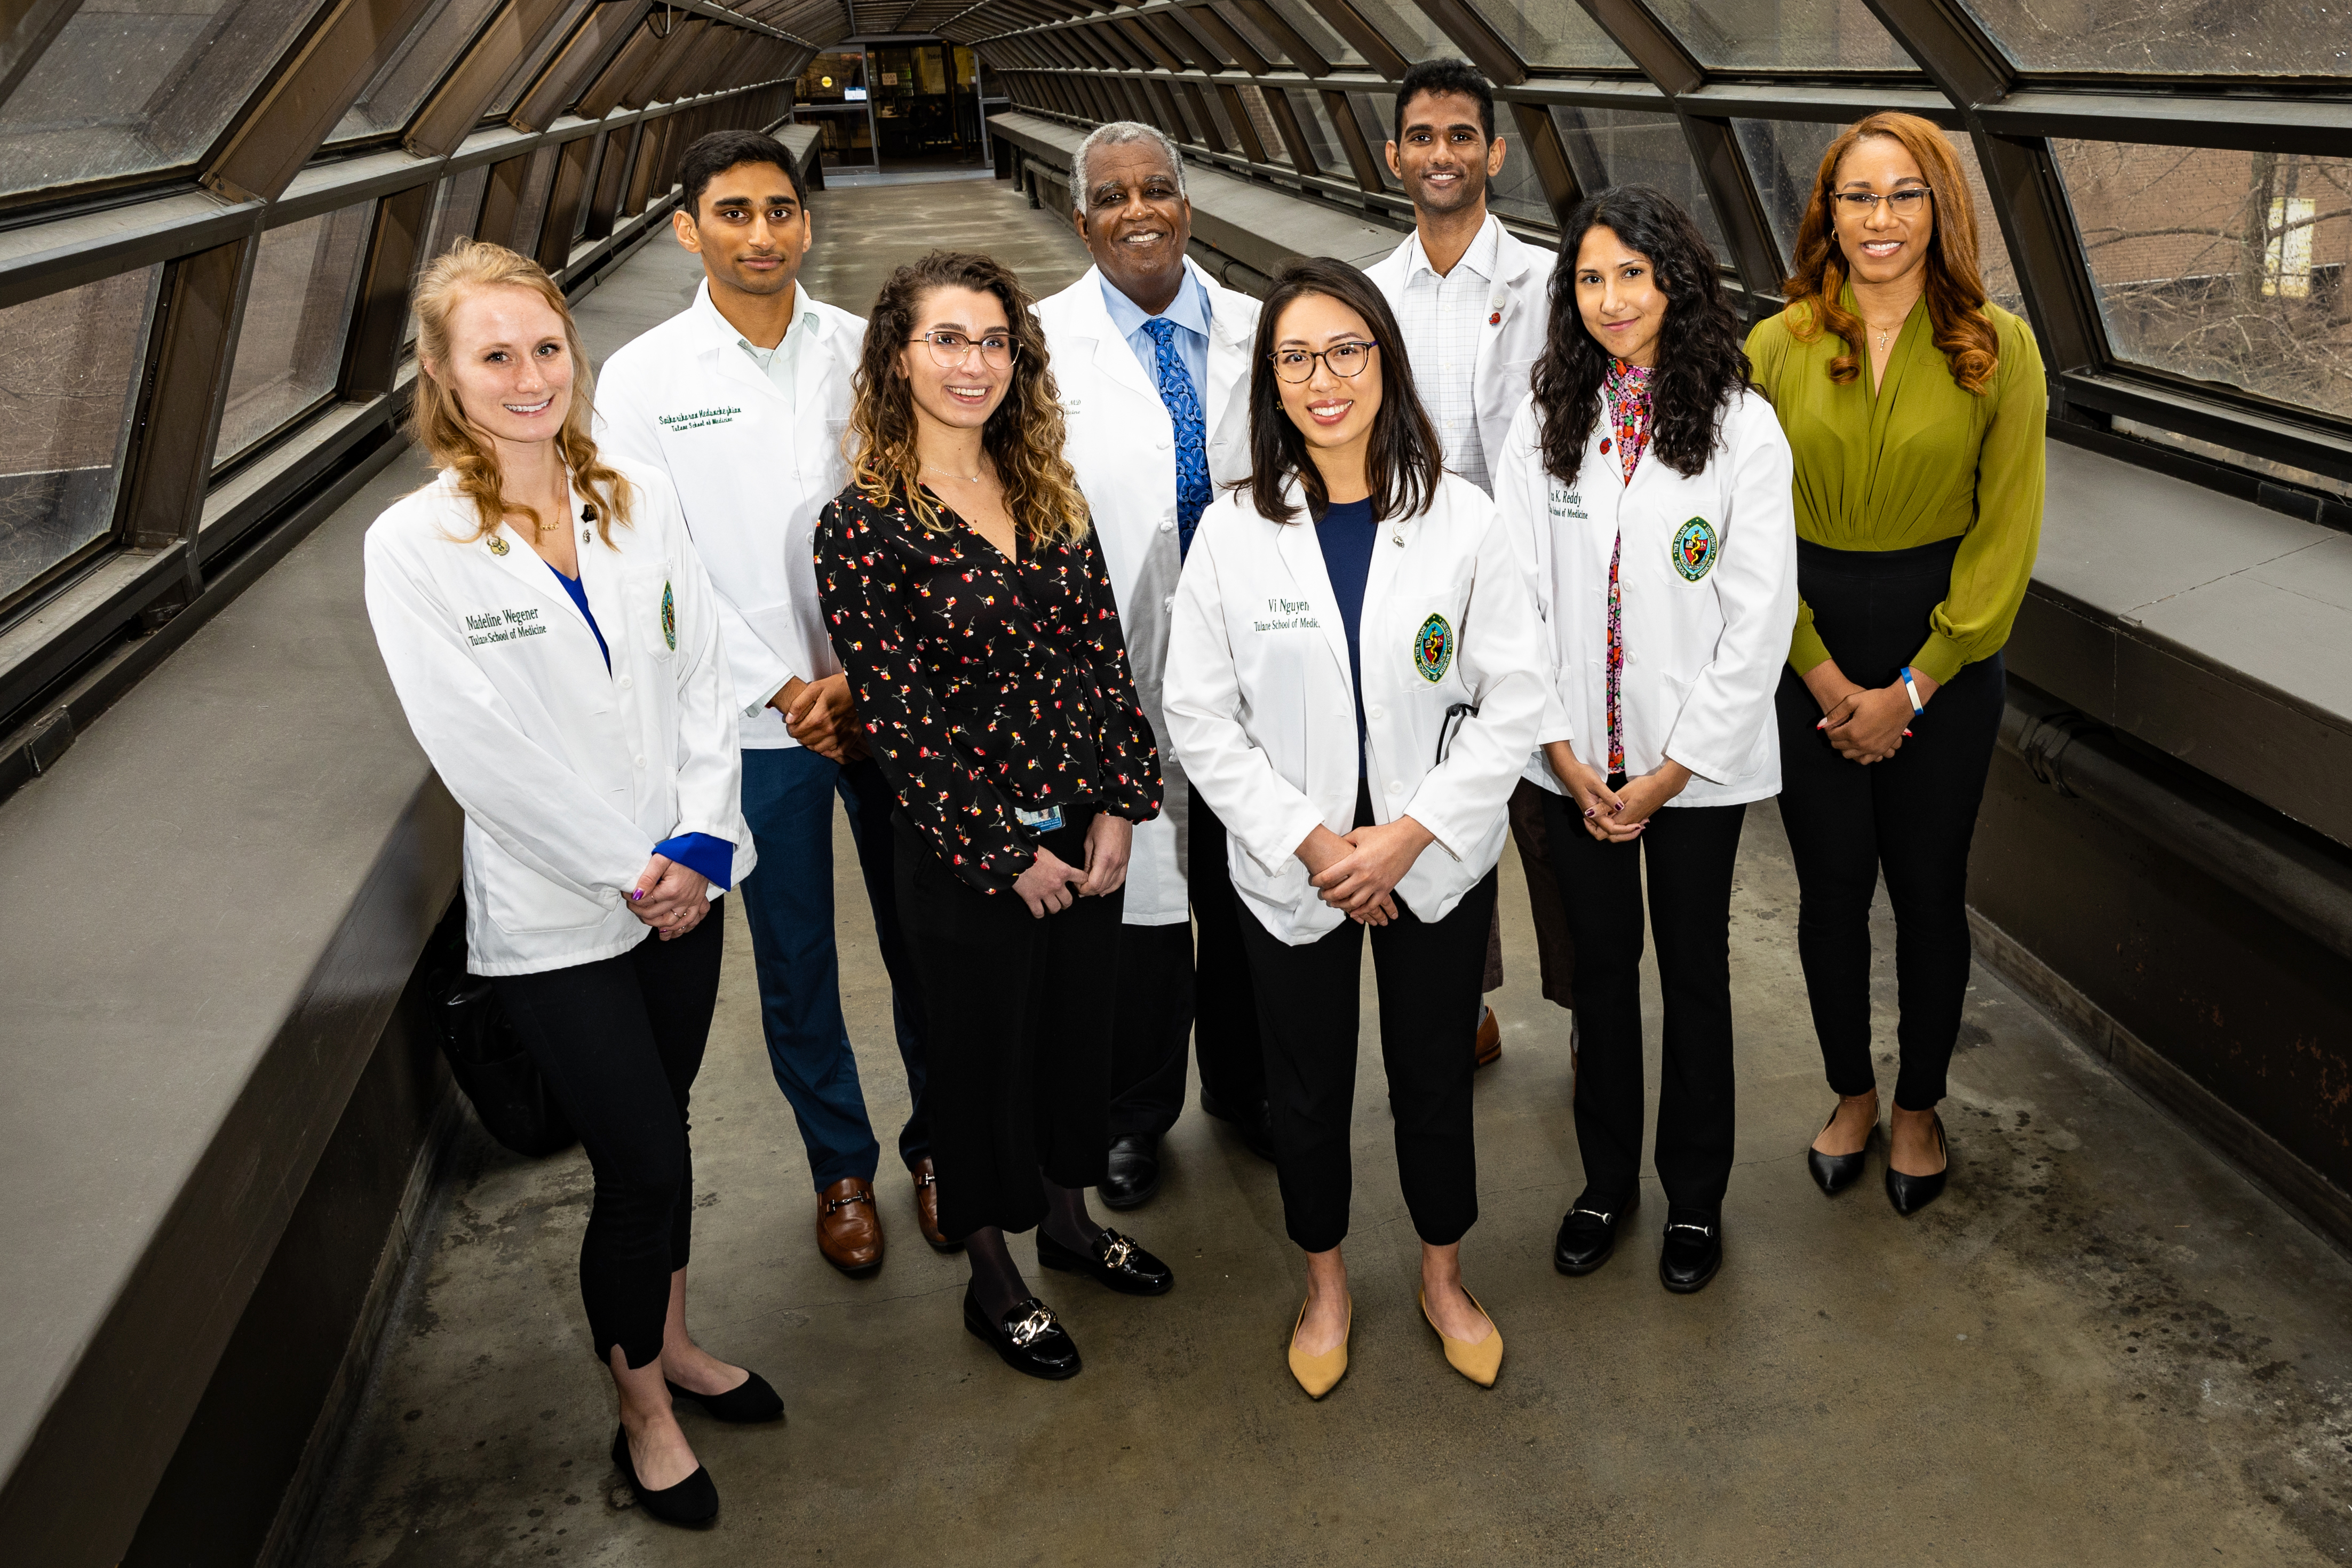 Dr. Keith Ferdinand, the Gerald S. Berenson chair of preventative cardiology at Tulane University School of Medicine, stands with a diverse team of Tulane students